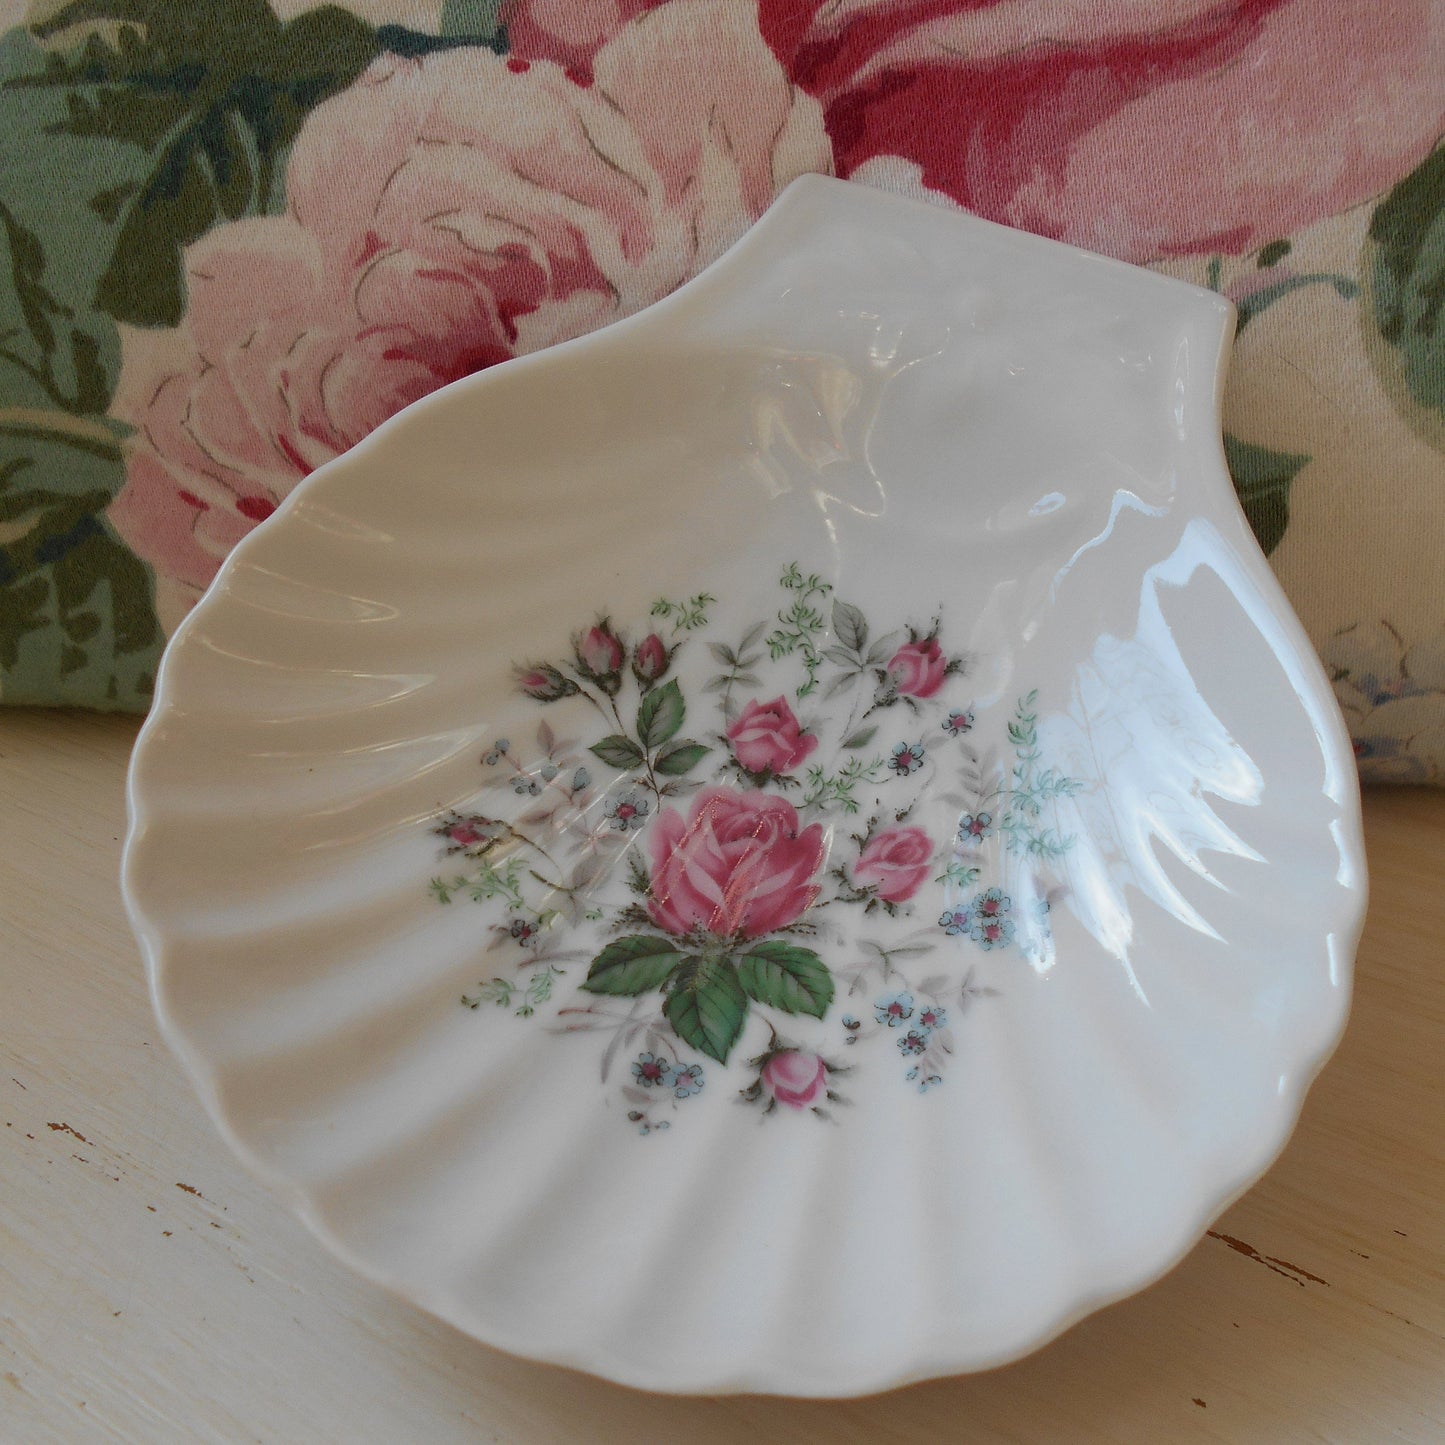 Limoges Porcelain Caviar Dish. Ideal 'French Boudoir' Dressing Table Jewelry/ Soap Dish. from Tiggy & Pip - €38.00! Shop now at Tiggy and Pip